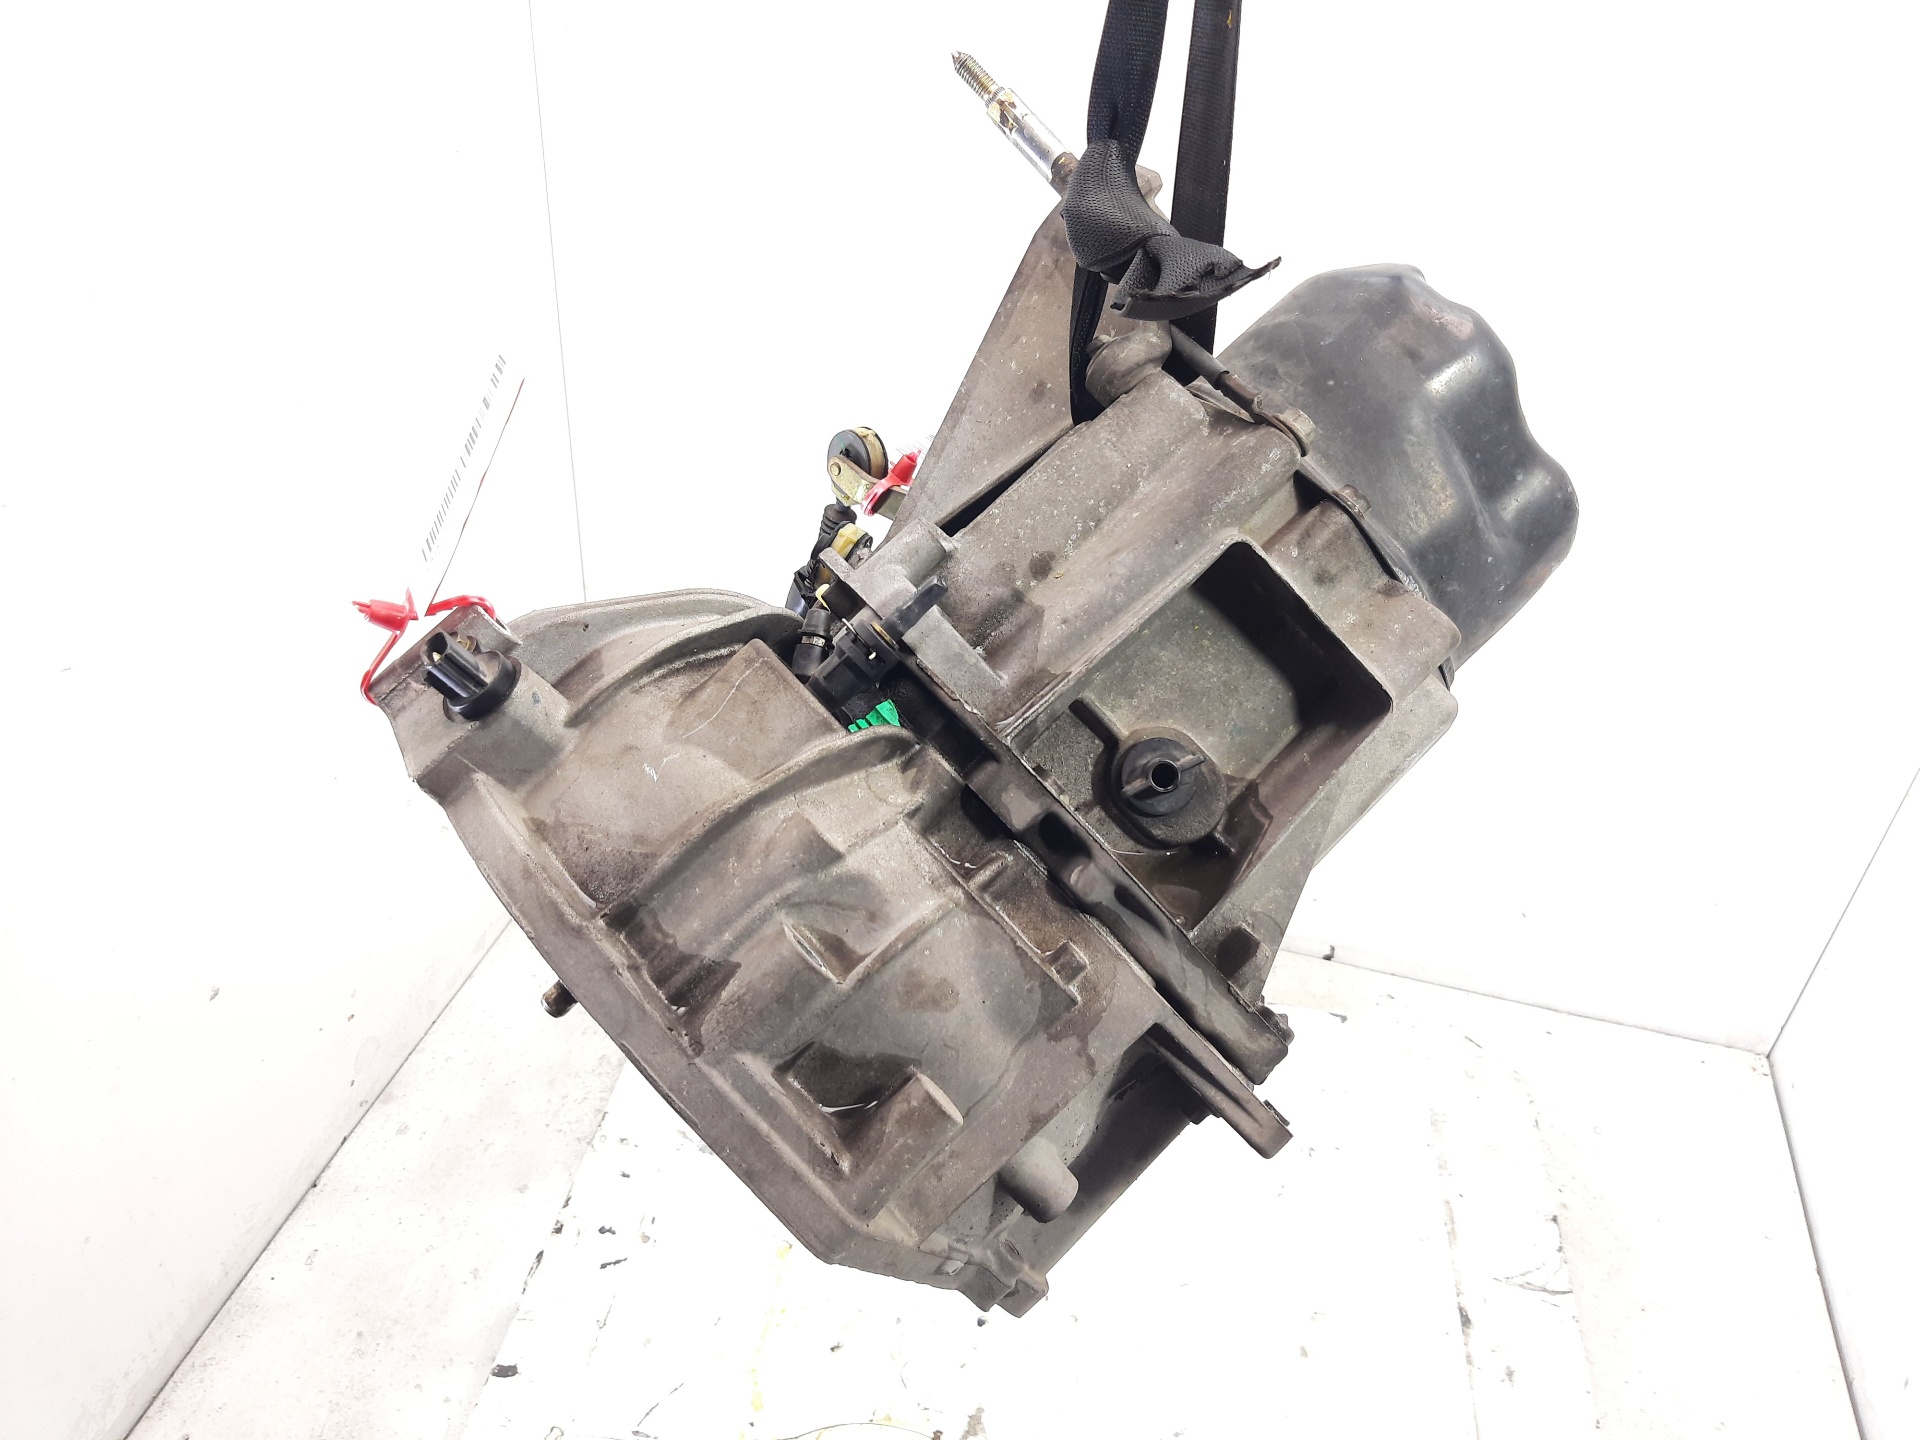 NISSAN Micra K12 (2002-2010) Gearbox JH3103, 5VELOCIDADES 21087683